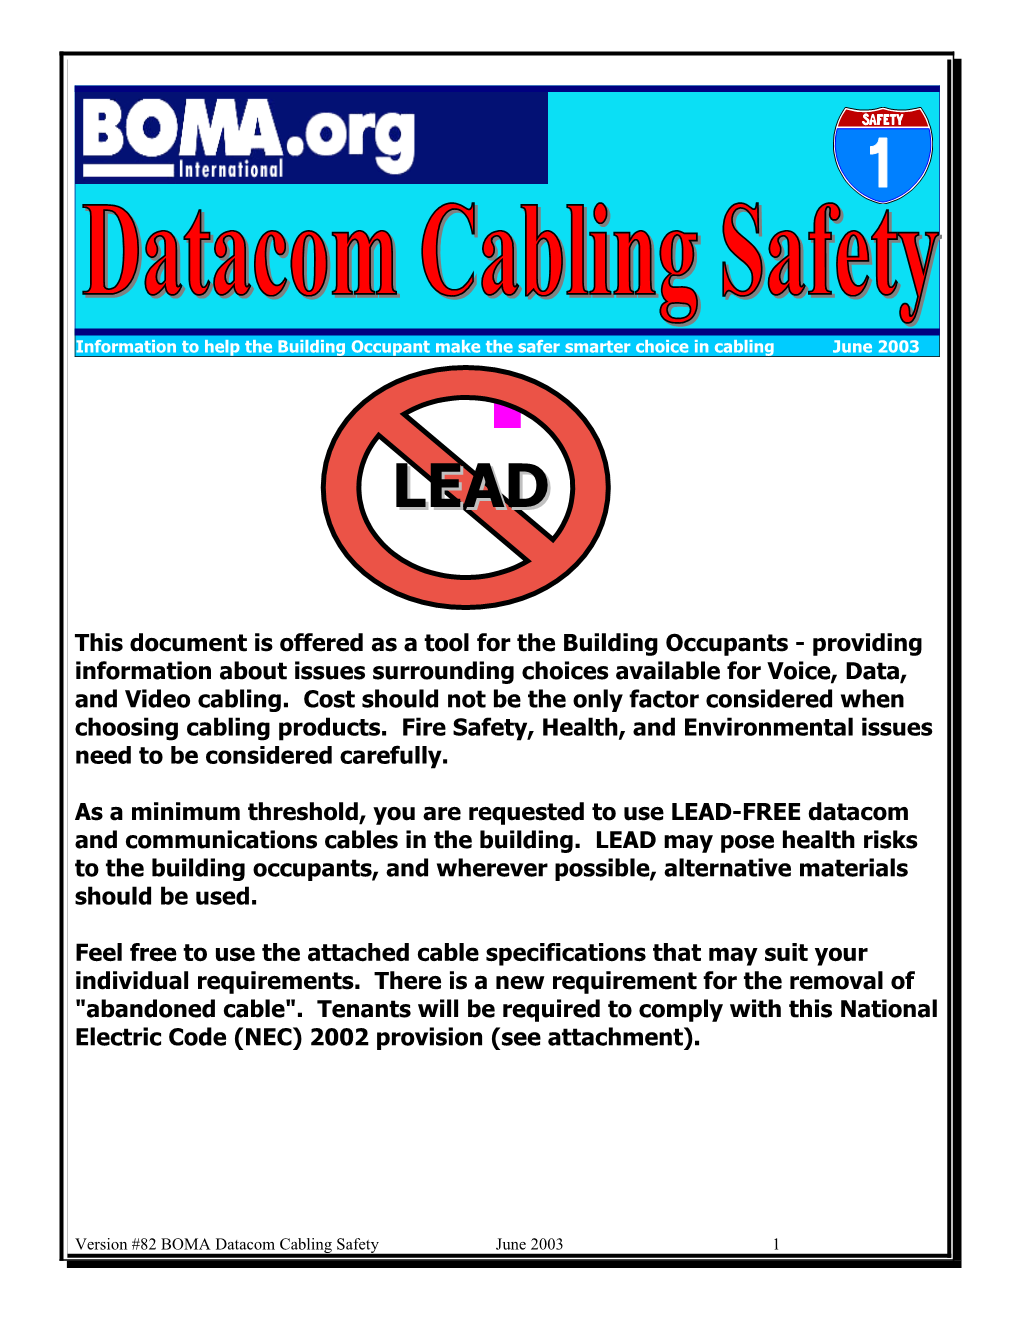 Data Cabling Safety